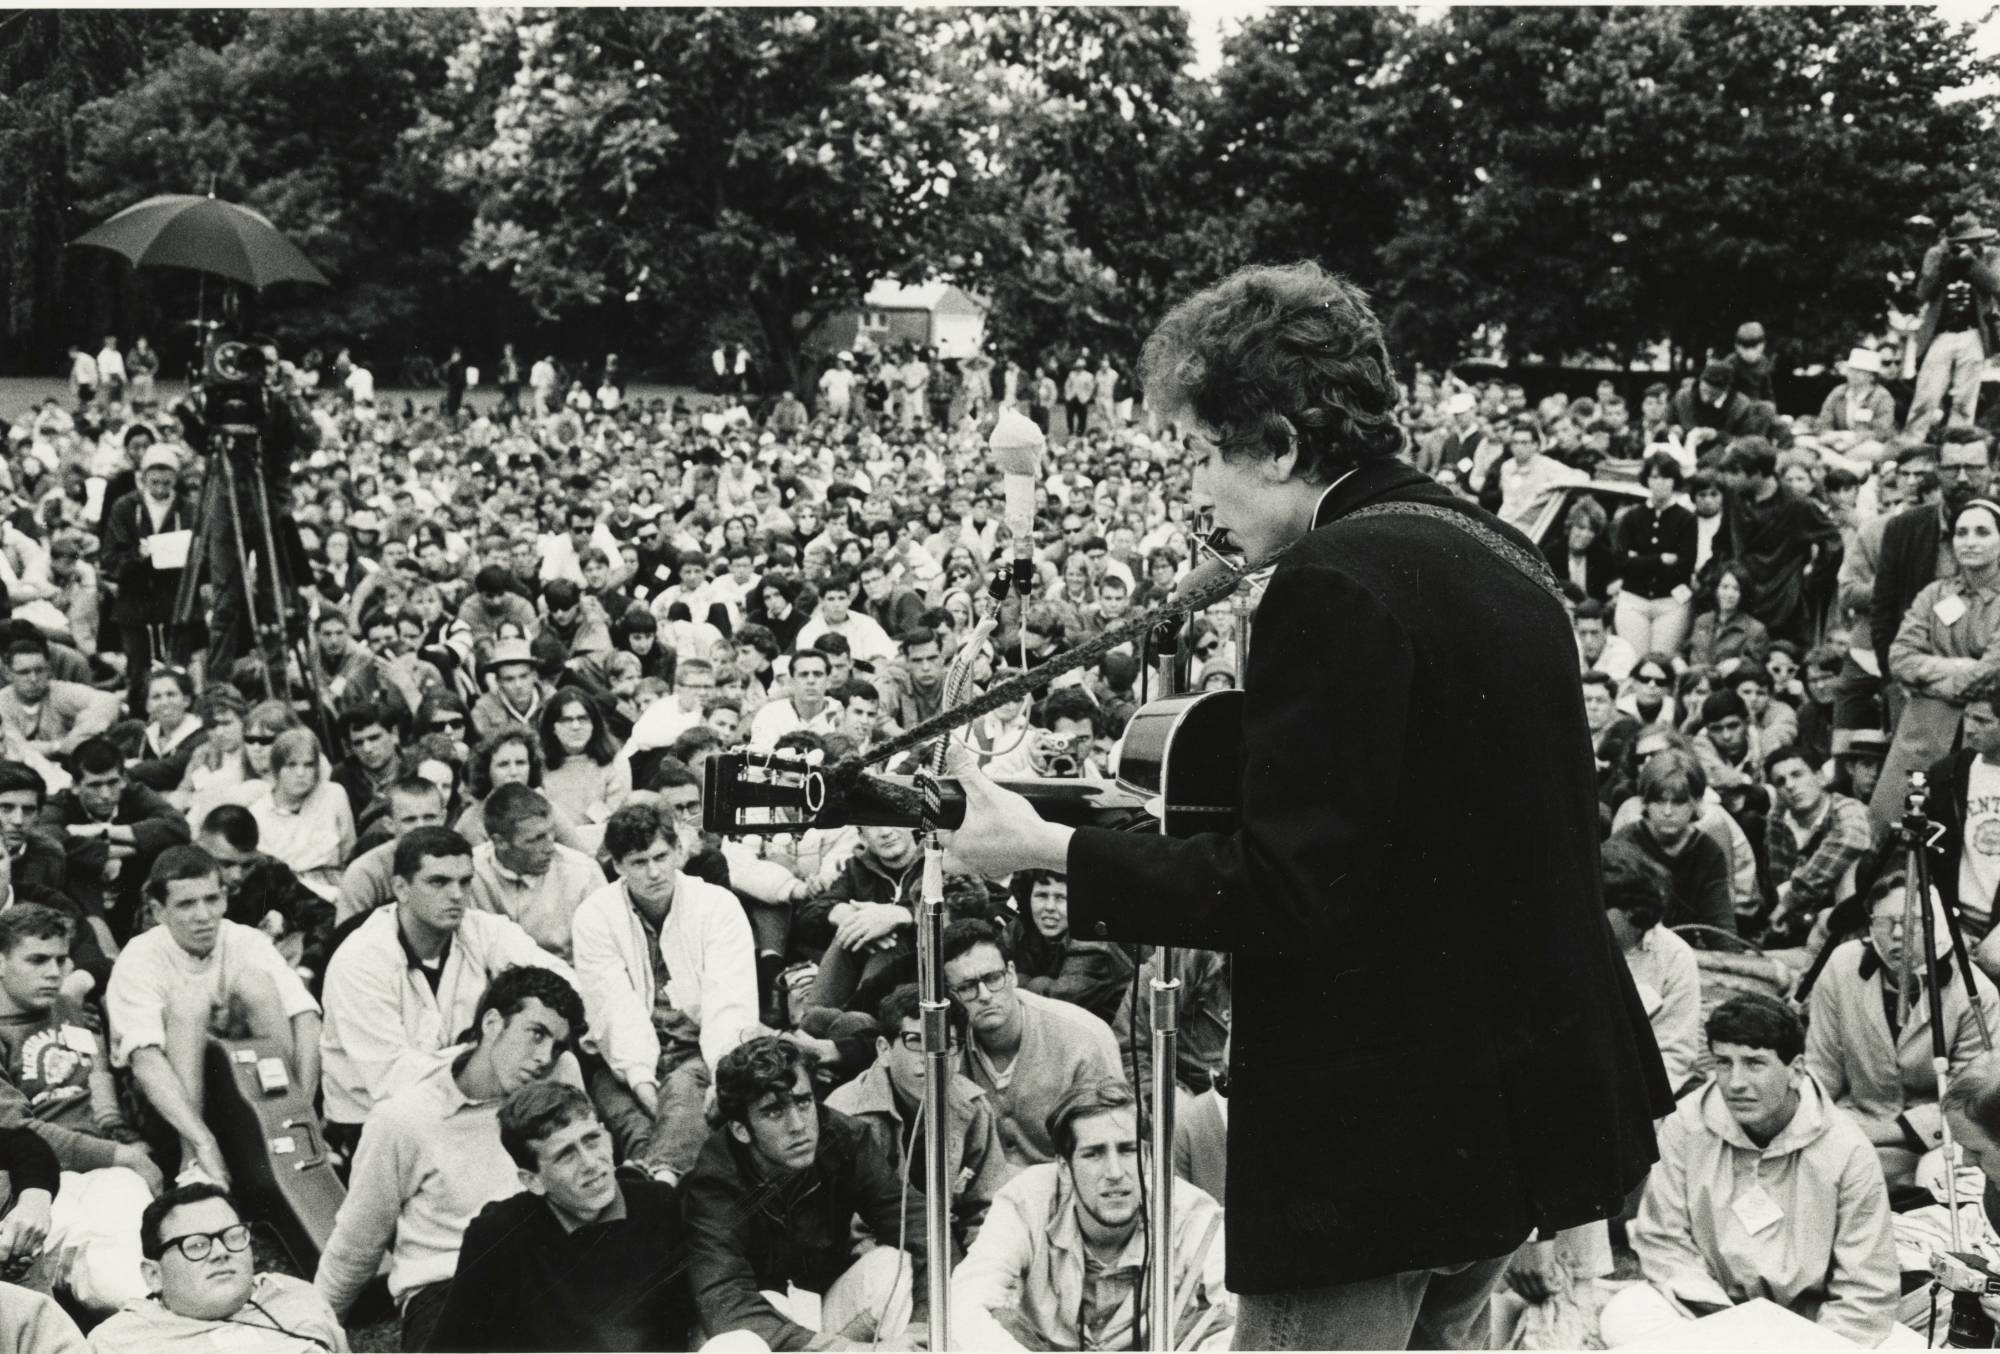 Bob Dylan on stage playing guitar and singing to crowd